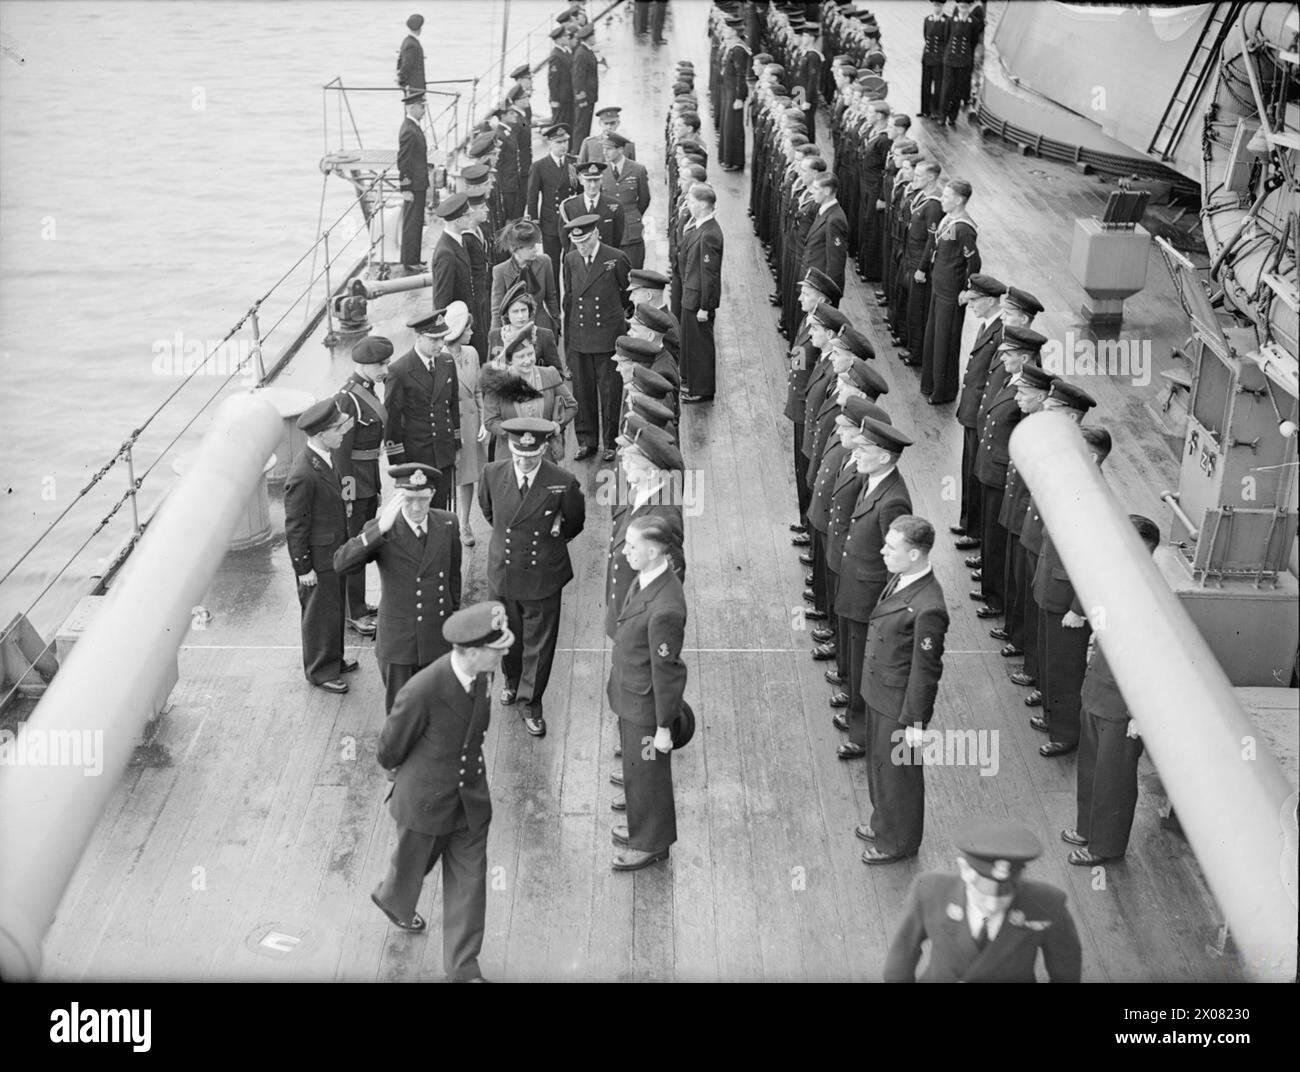 ROYAL VISIT TO HMS KING GEORGE V. 29 OCTOBER 1944, GREENOCK. THE KING AND QUEEN ACCOMPANIED BY PRINCESS ELIZABETH AND PRINCESS MARGARET PAID A FAREWELL VISIT TO THE BATTLESHIP HMS KING GEORGE V BEFORE SHE LEFT TO JOIN BRITAIN'S EAST INDIES FLEET. - The King and Queen accompanied by the Princesses, inspecting Divisions Stock Photo